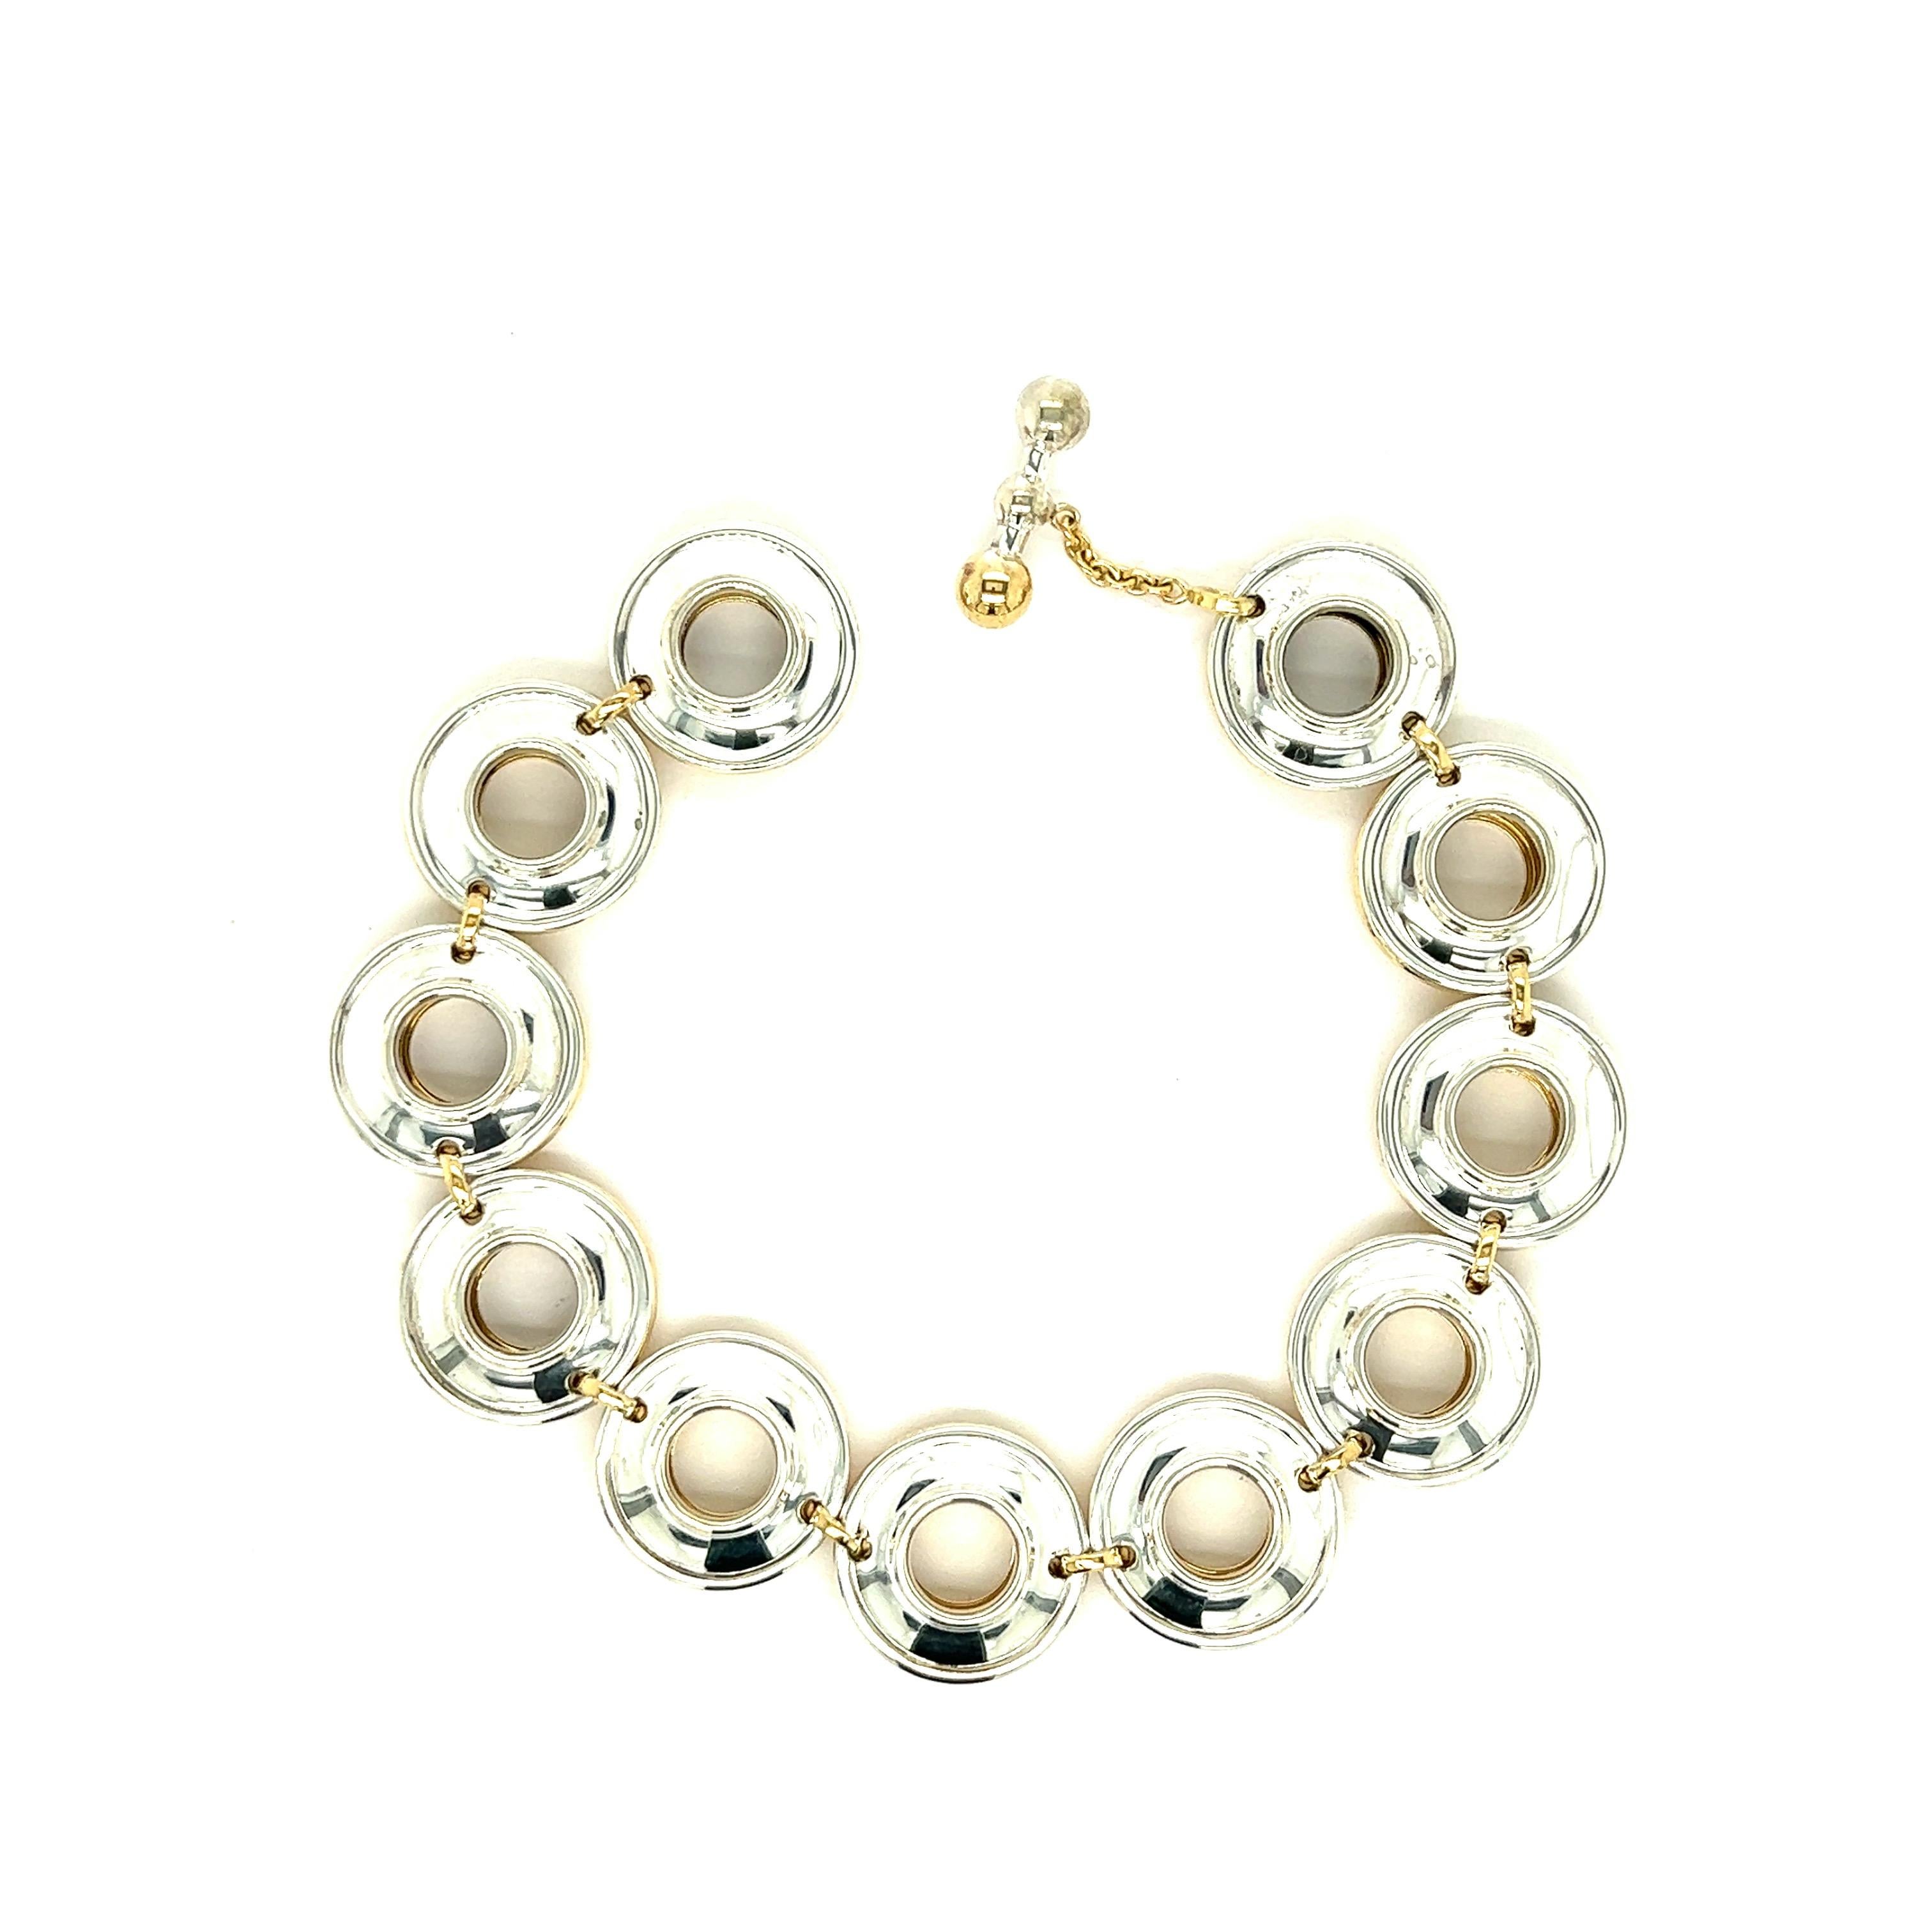 Paloma Picasso for Tiffany & Co. 18k Yellow Gold & Silver Links Bracelet In Good Condition For Sale In New York, NY